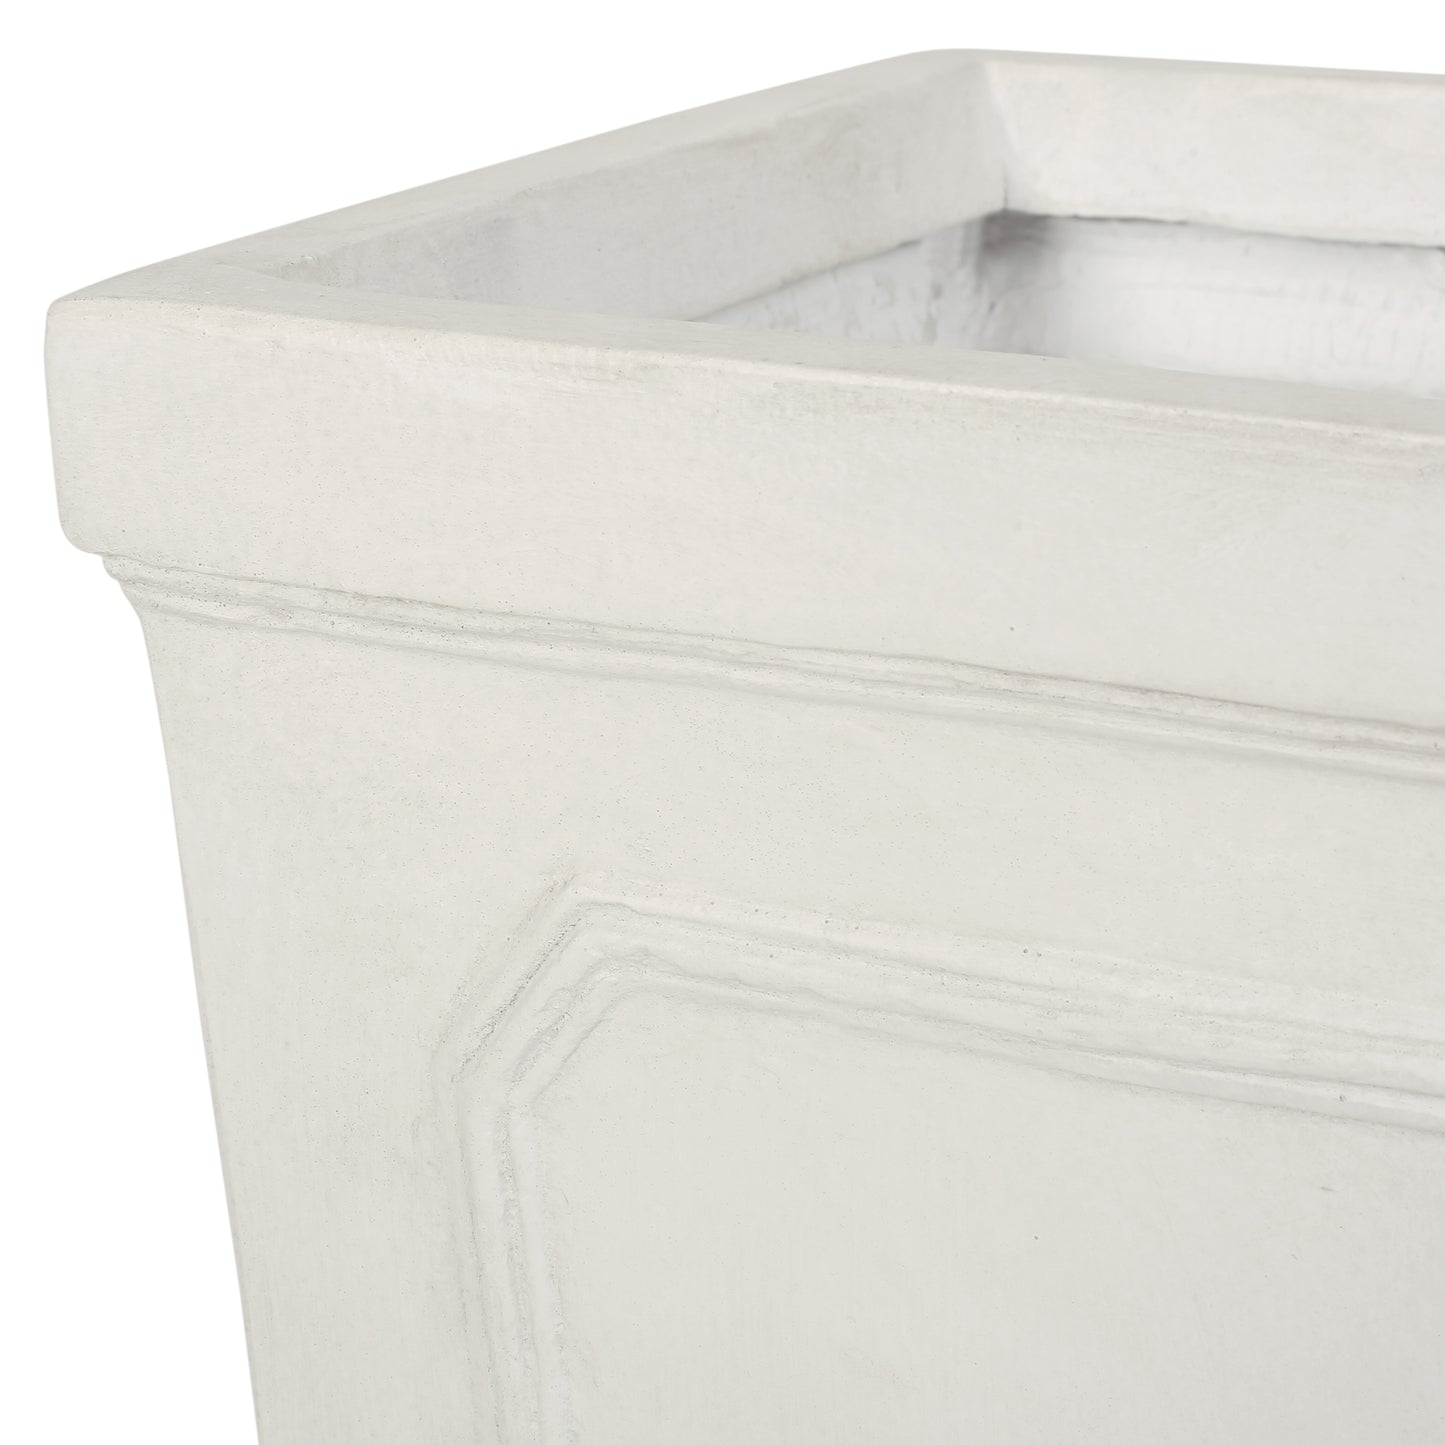 Greg Outdoor Small and Medium Cast Stone Tapered Planter Set, Antique White